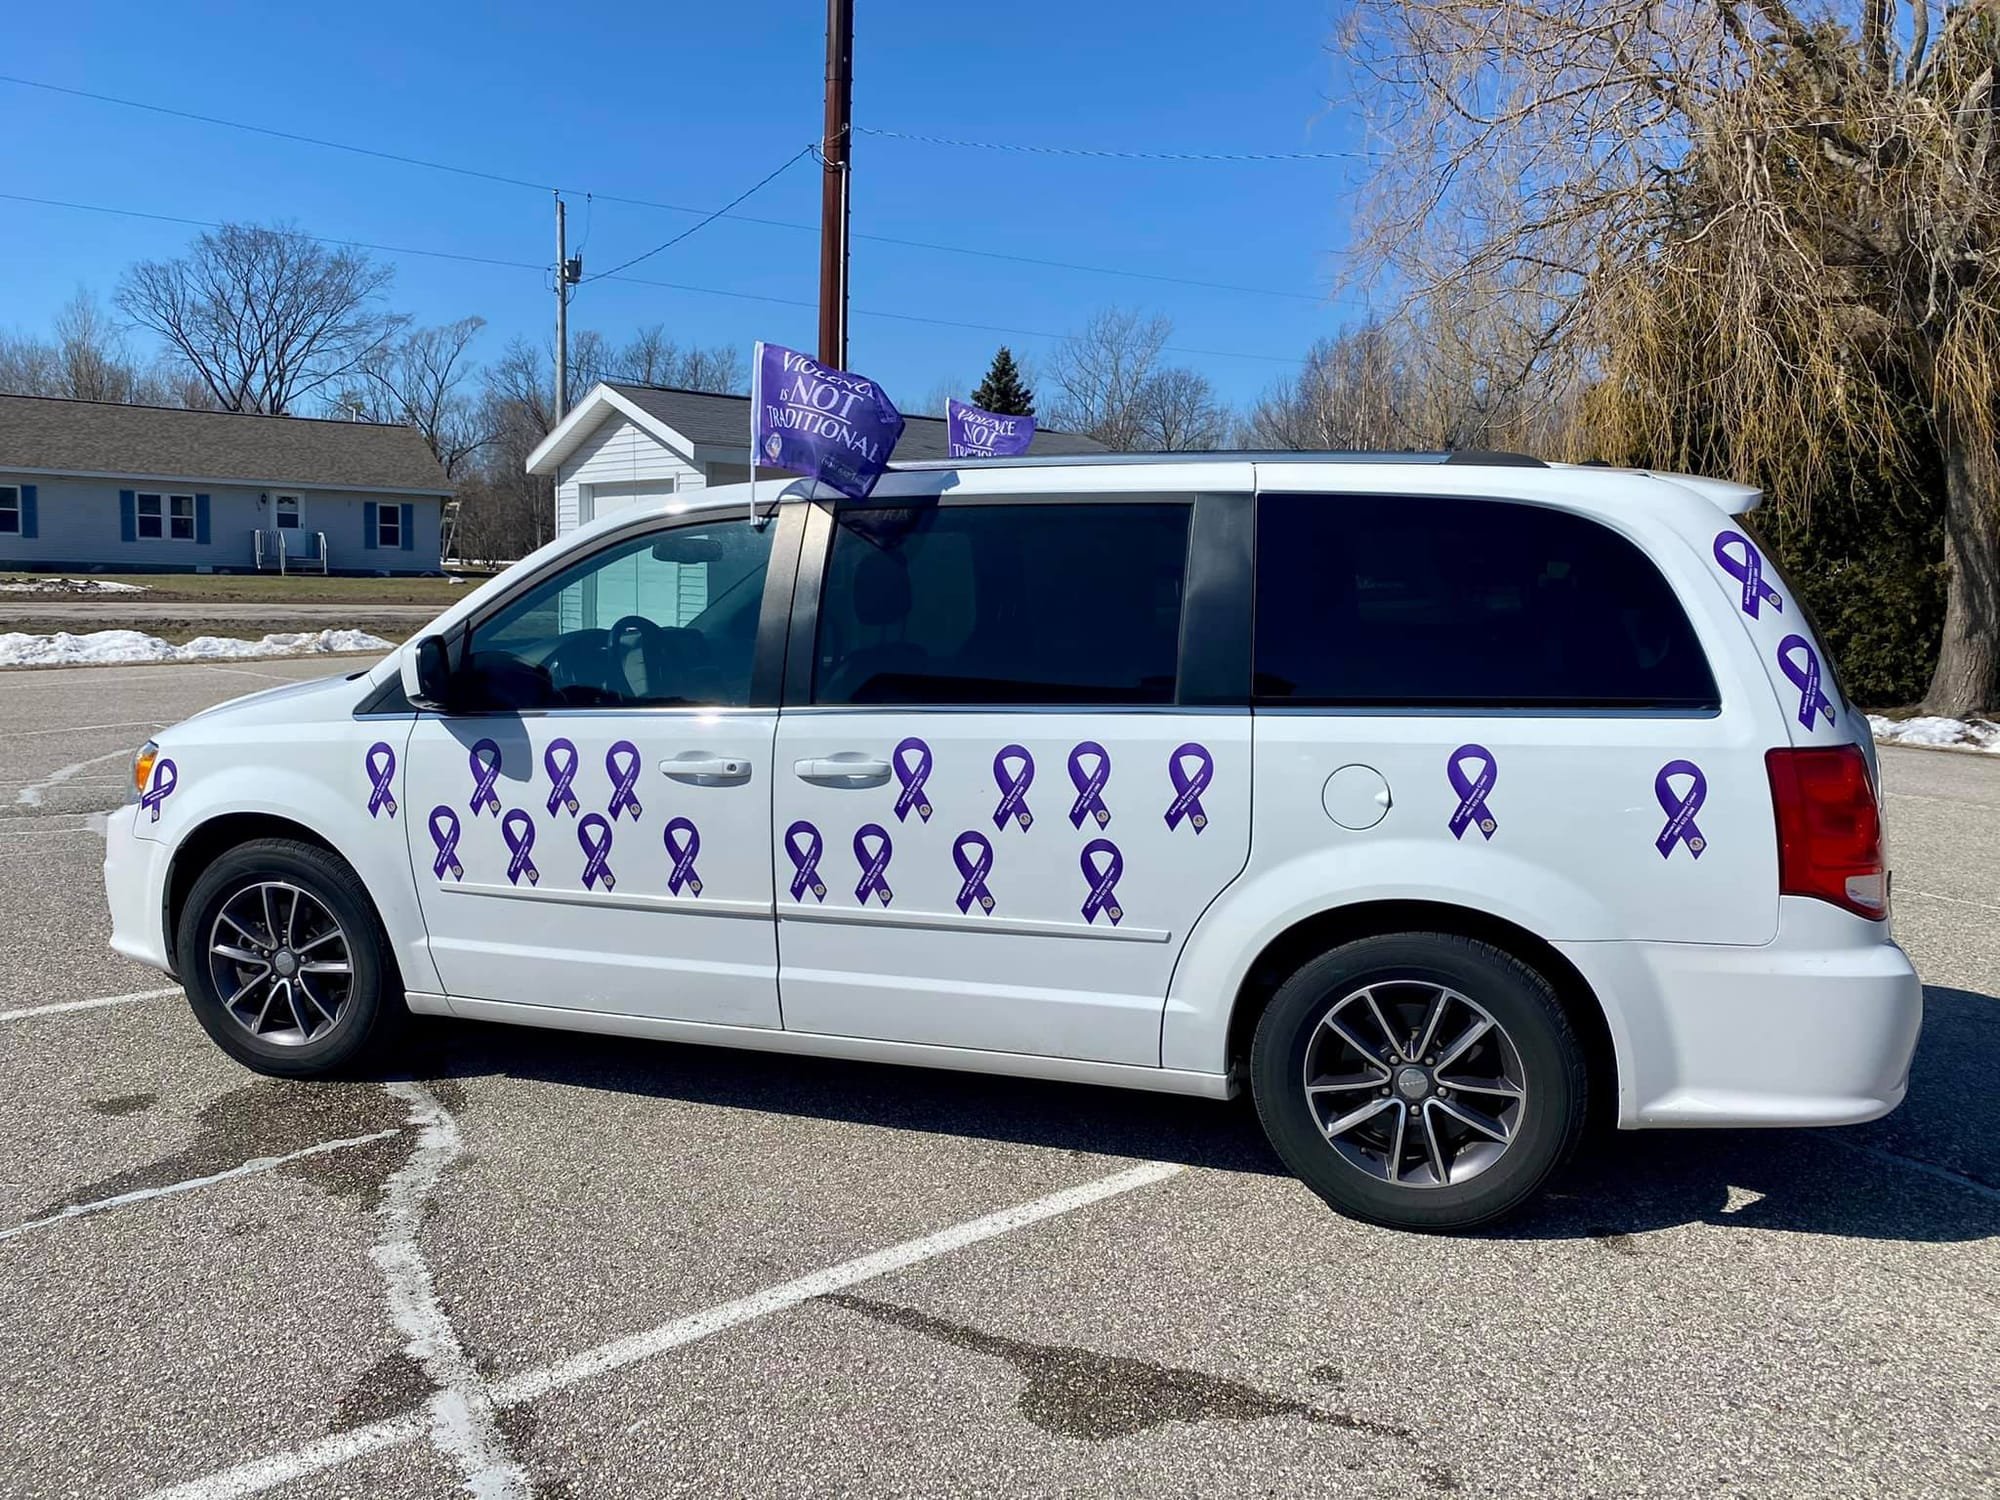 ARC van ready for the parking lot parade 2021